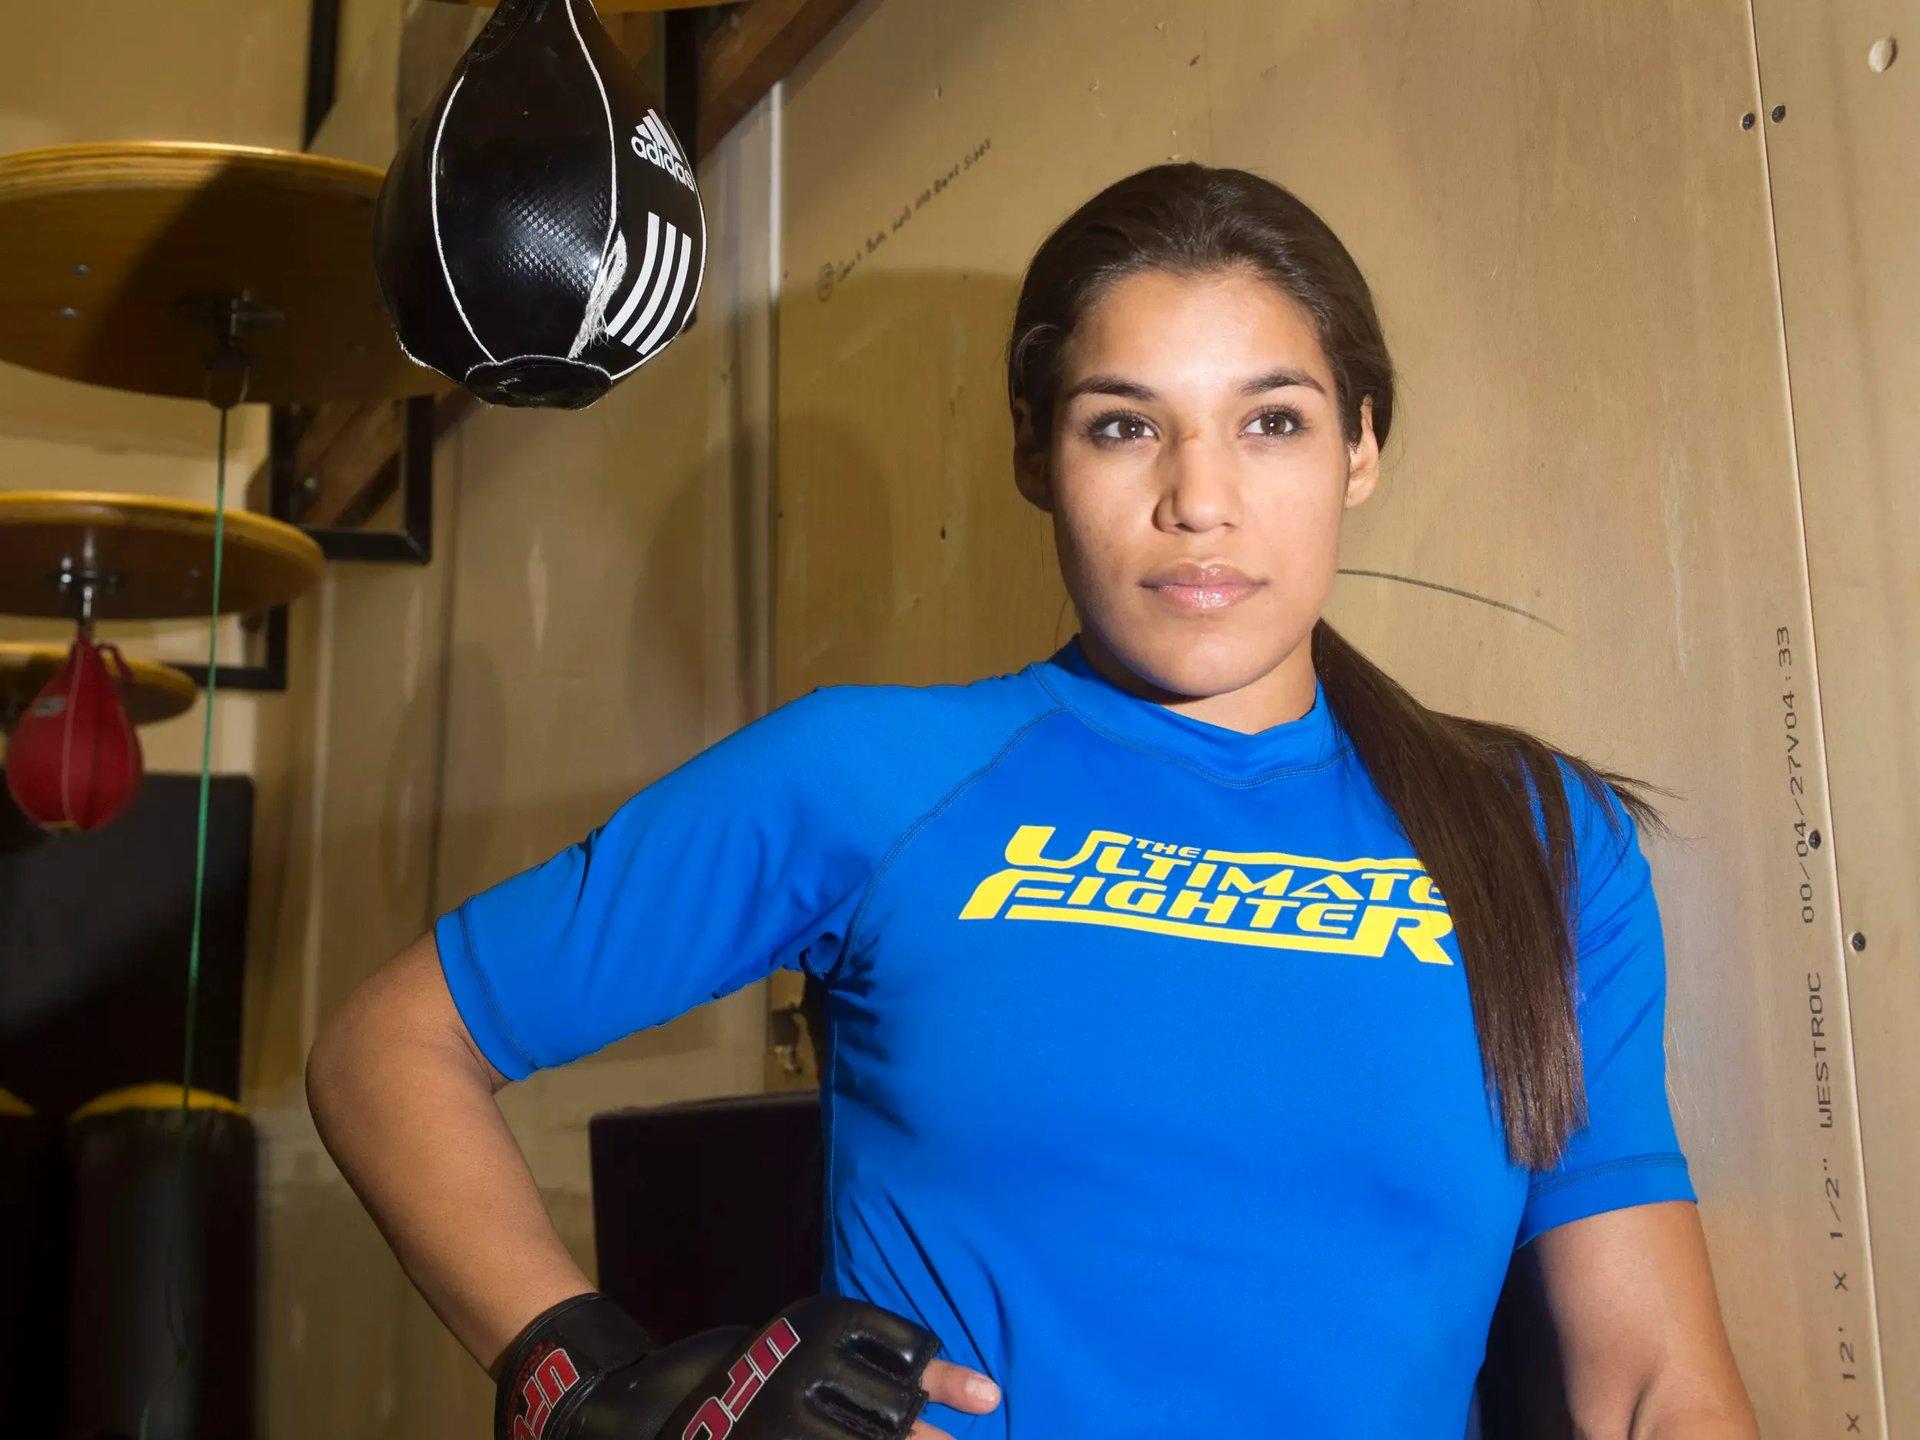 10 Ultimate Fighter Winners who went on to become TUF Coaches